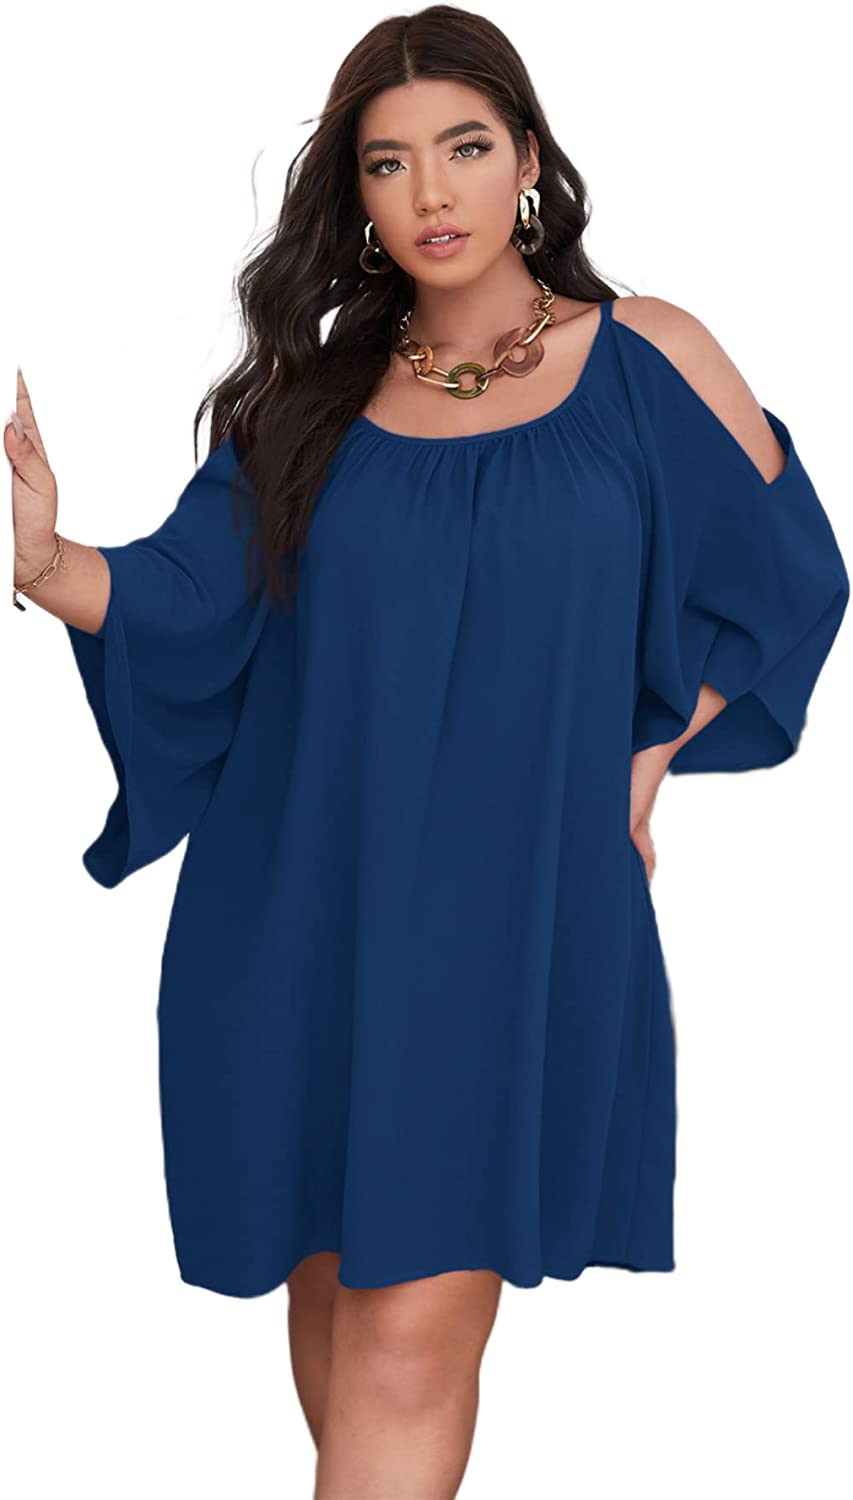 SOLY HUX Women Plus Size Casual Summer Dress Cold Shoulder 3/4 Sleeve Short  Tshi